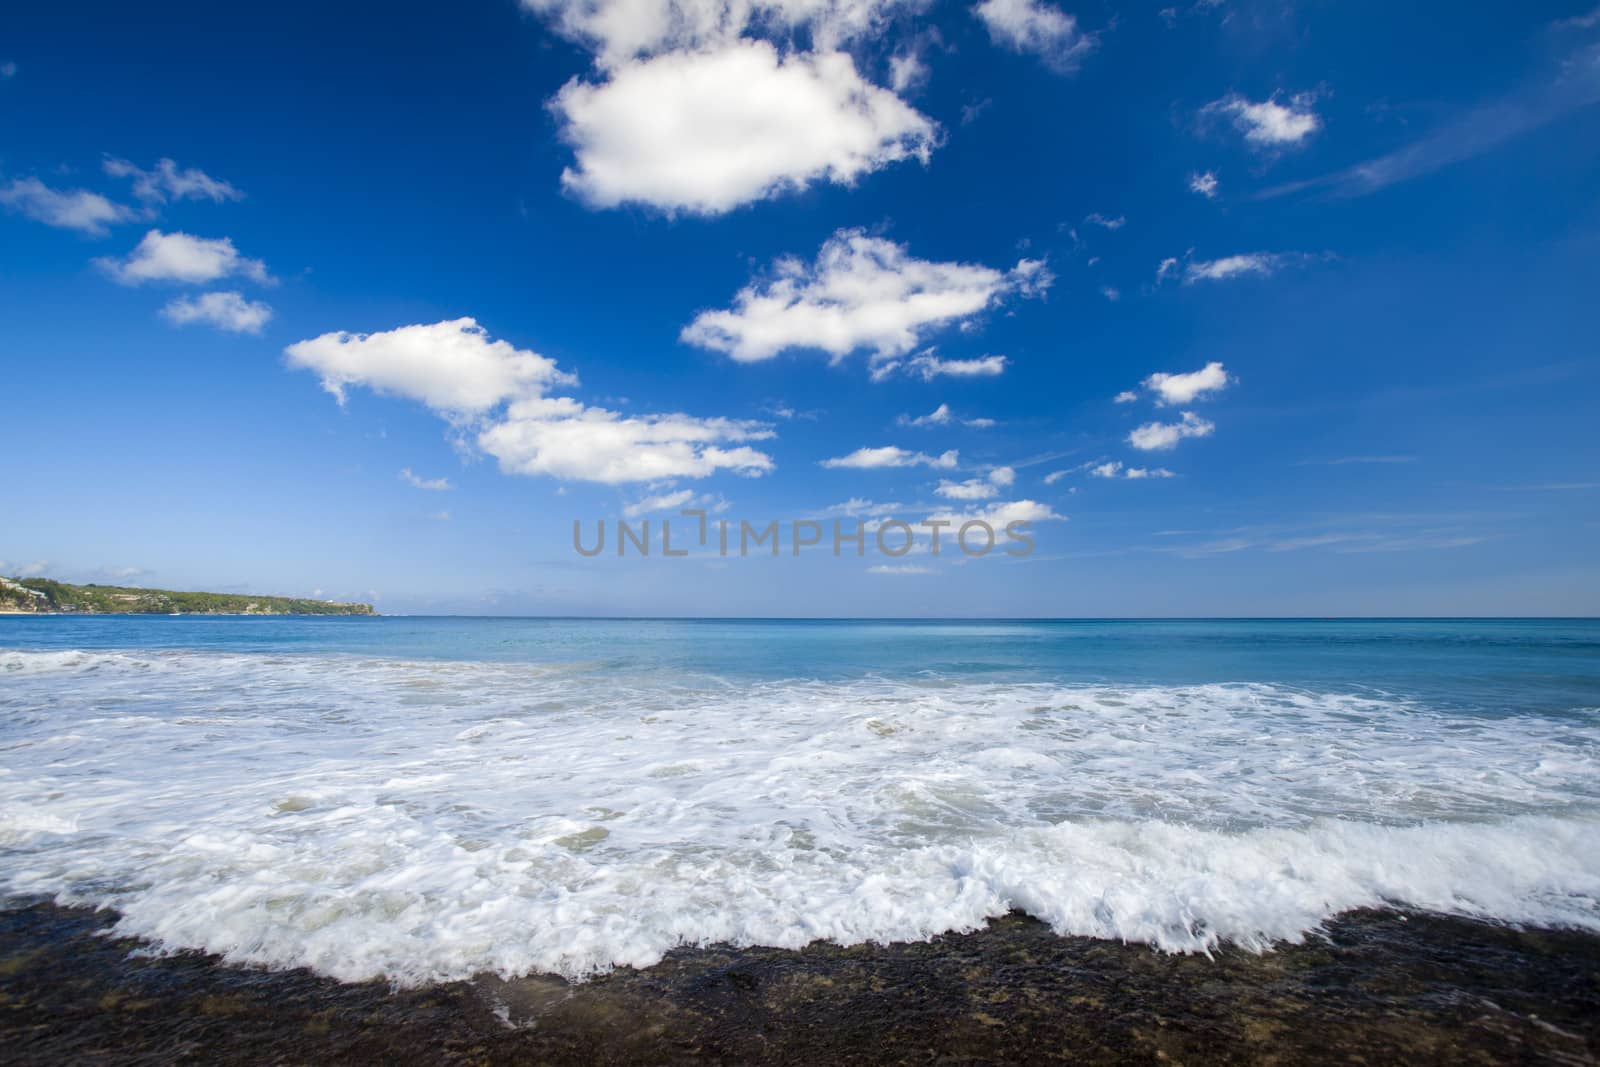 Beautiful landscape of a tropical beach with a beautiful blue sky